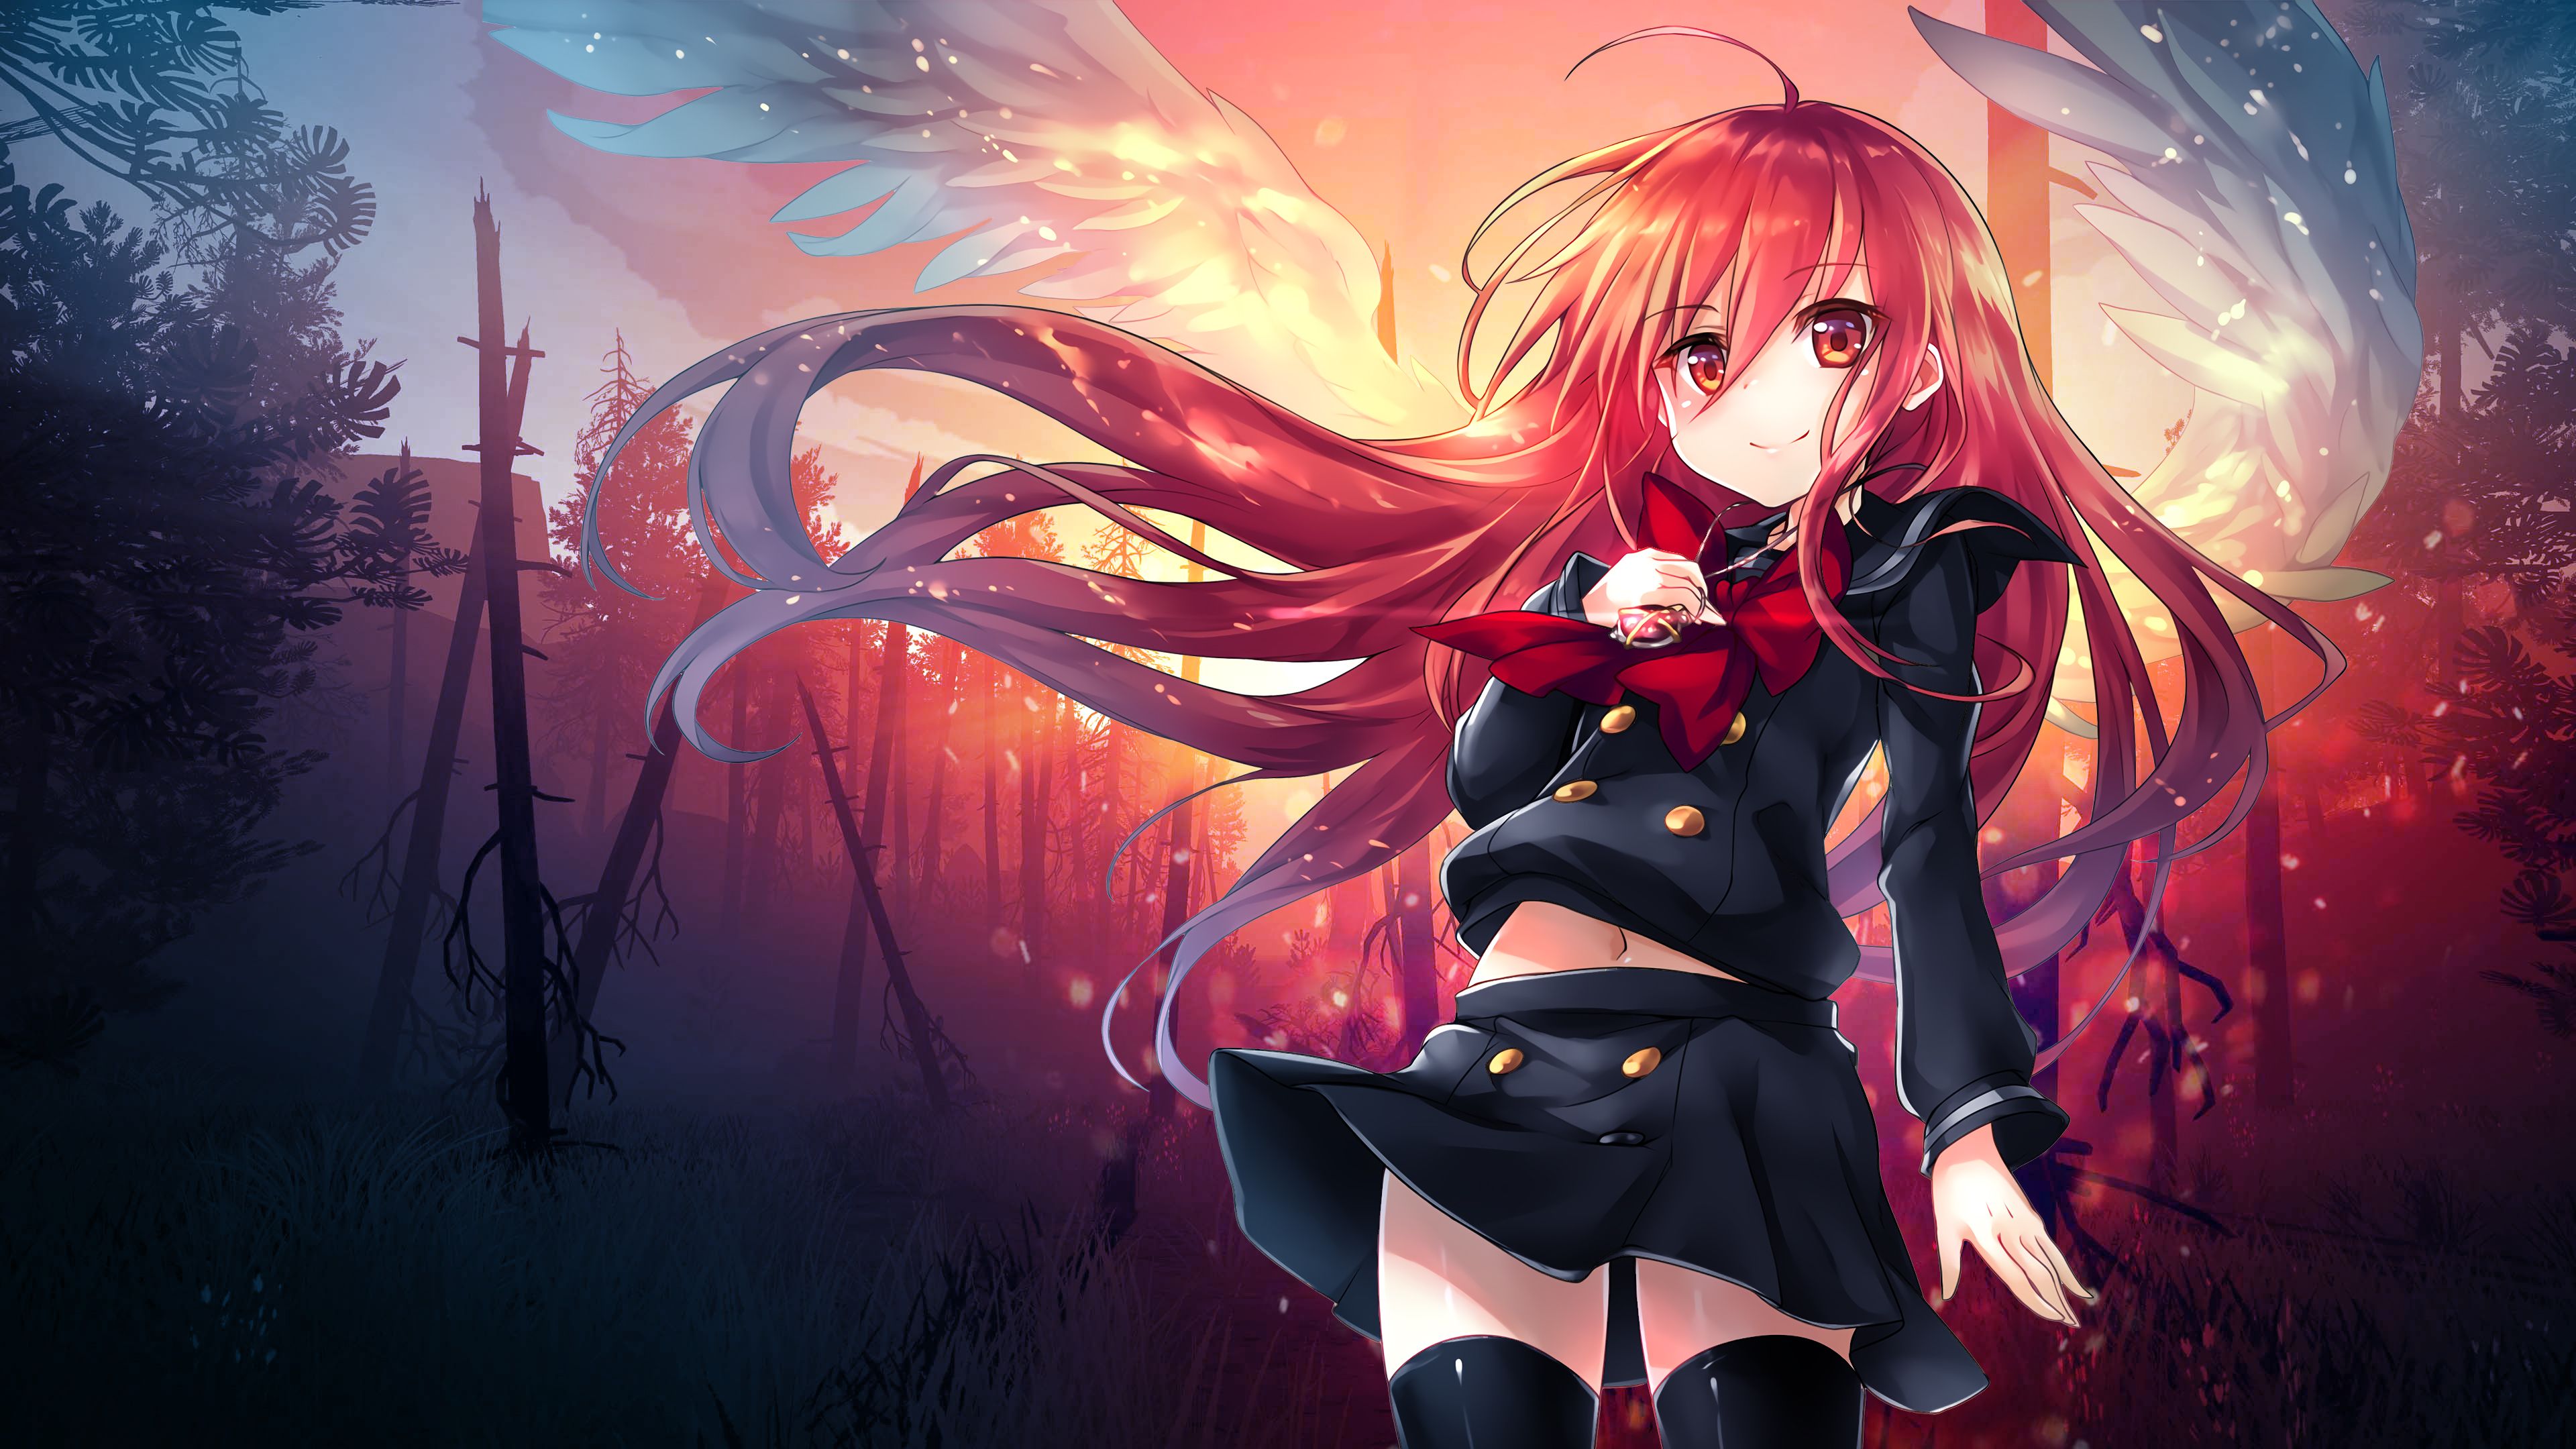 Anime wallpapers full hd, hdtv, fhd, 1080p, desktop backgrounds hd,  pictures and images